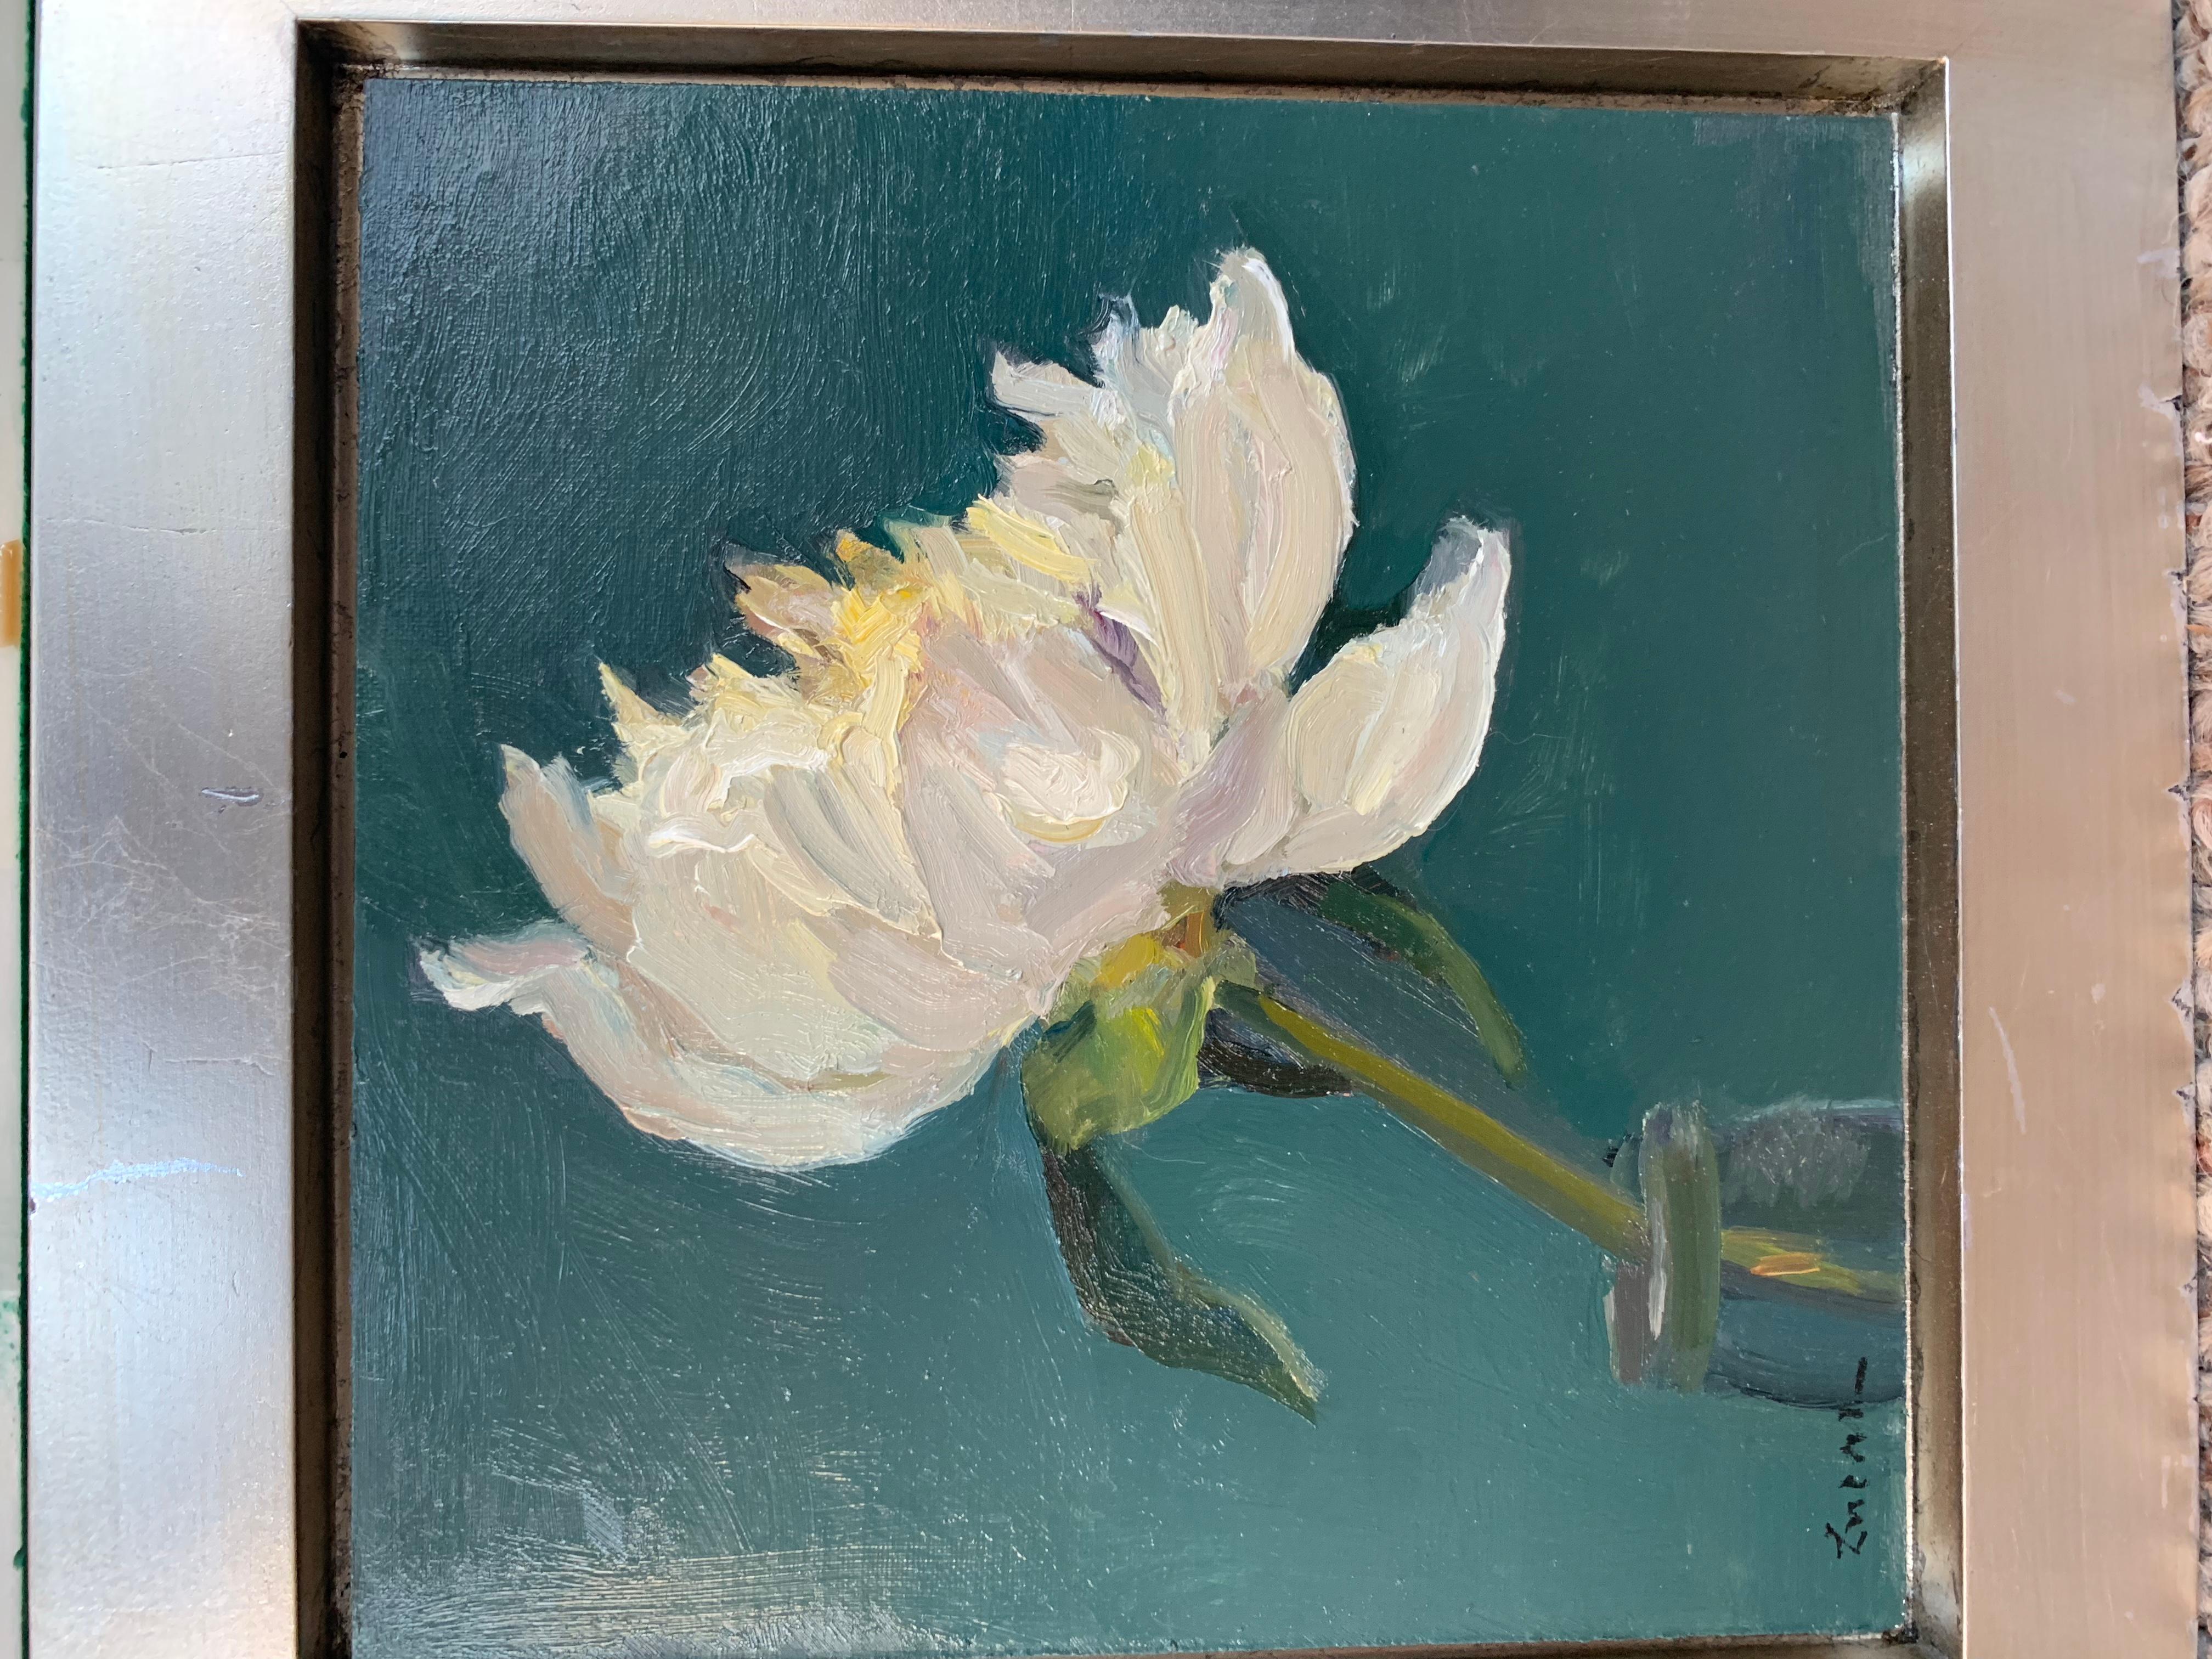 Maryann Lucas lives and works in Sag Harbor. She is primarily self-taught but has also received instruction and support from wonderful and generous members of the East End artistic community. Working exclusively in oils, Lucas sets out almost daily